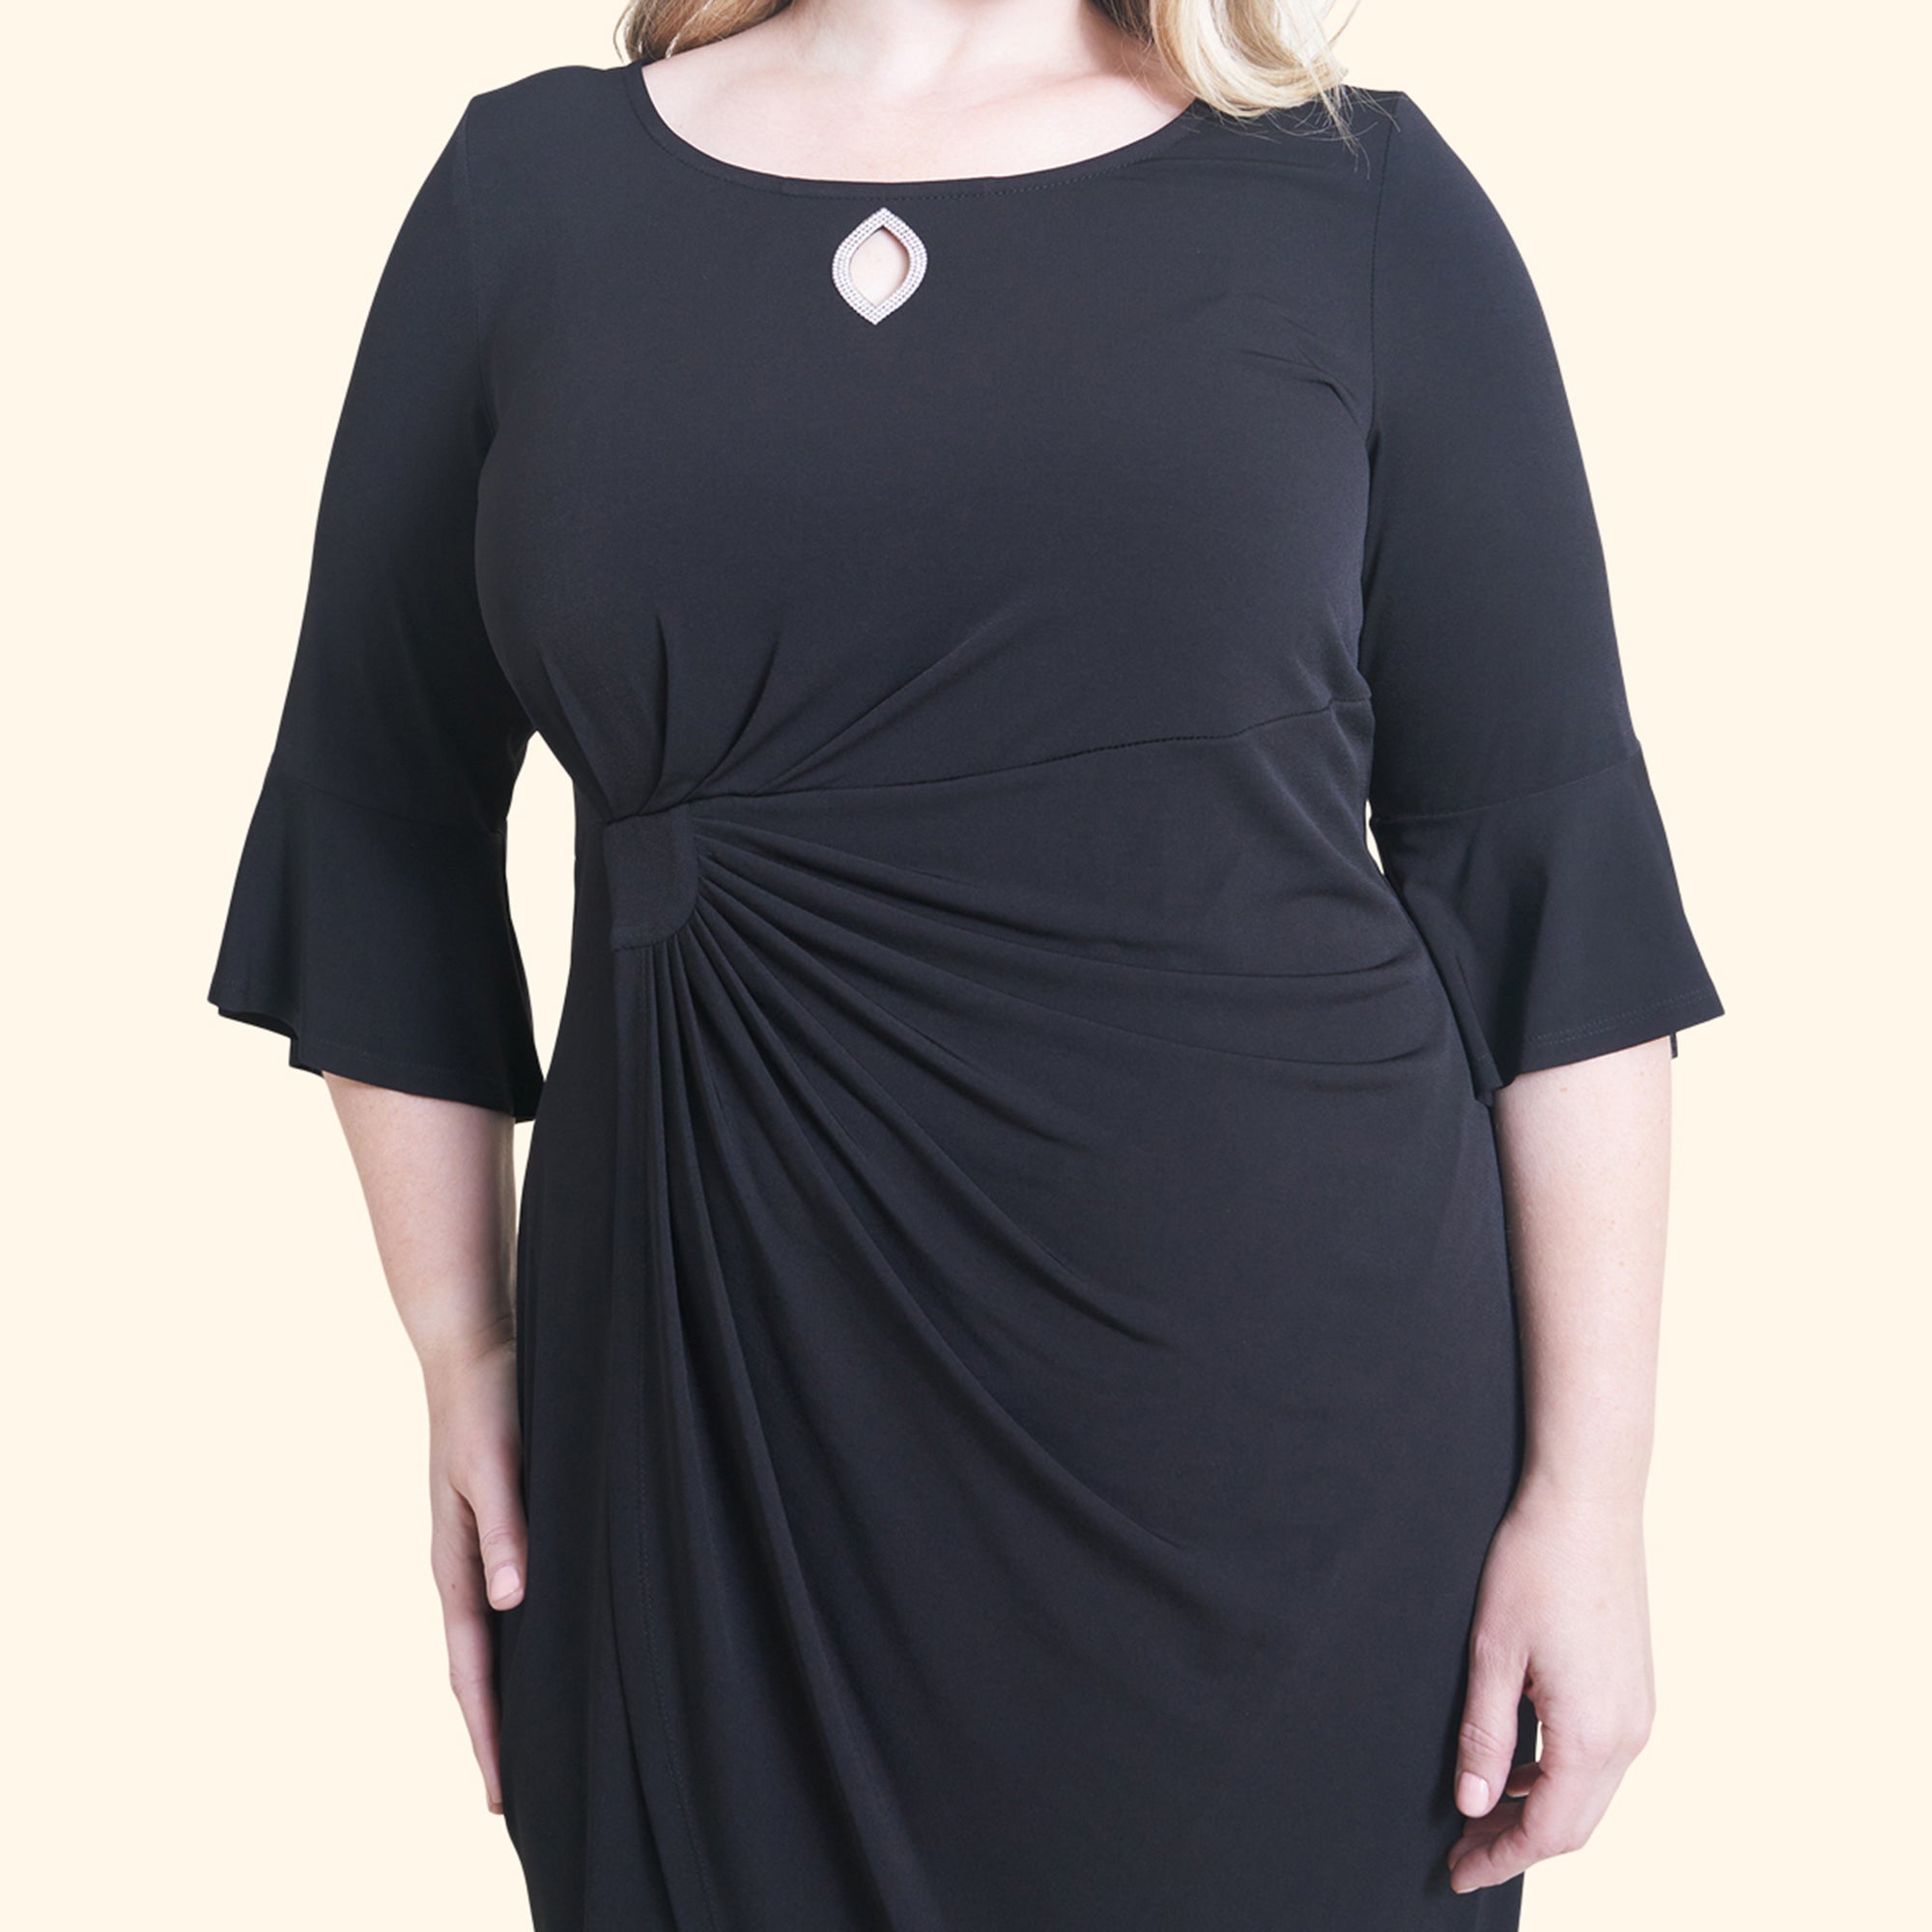 Woman posing wearing Black Lisa 2.0 Little Black Cocktail Dress from Connected Apparel